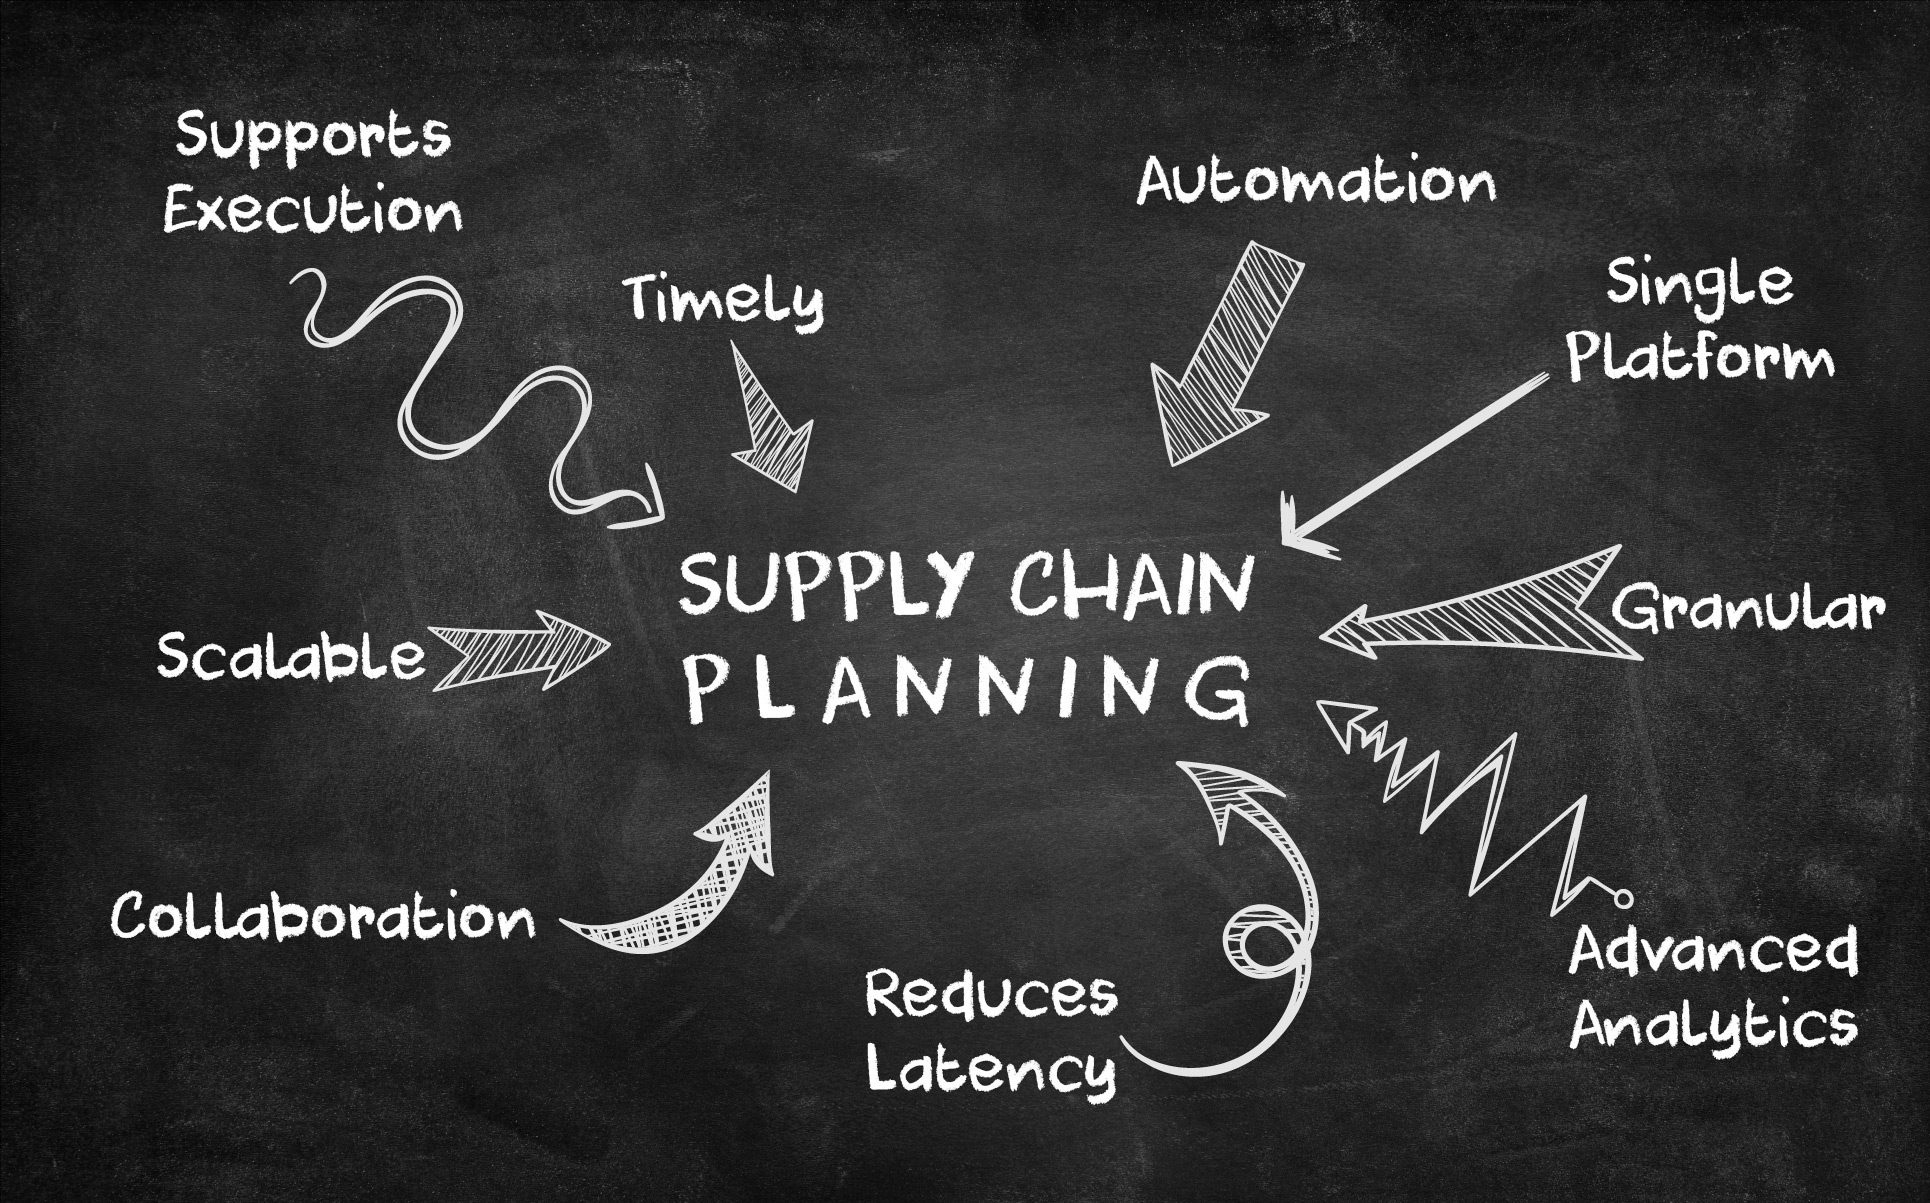 The challenges of Supply Chain Planning